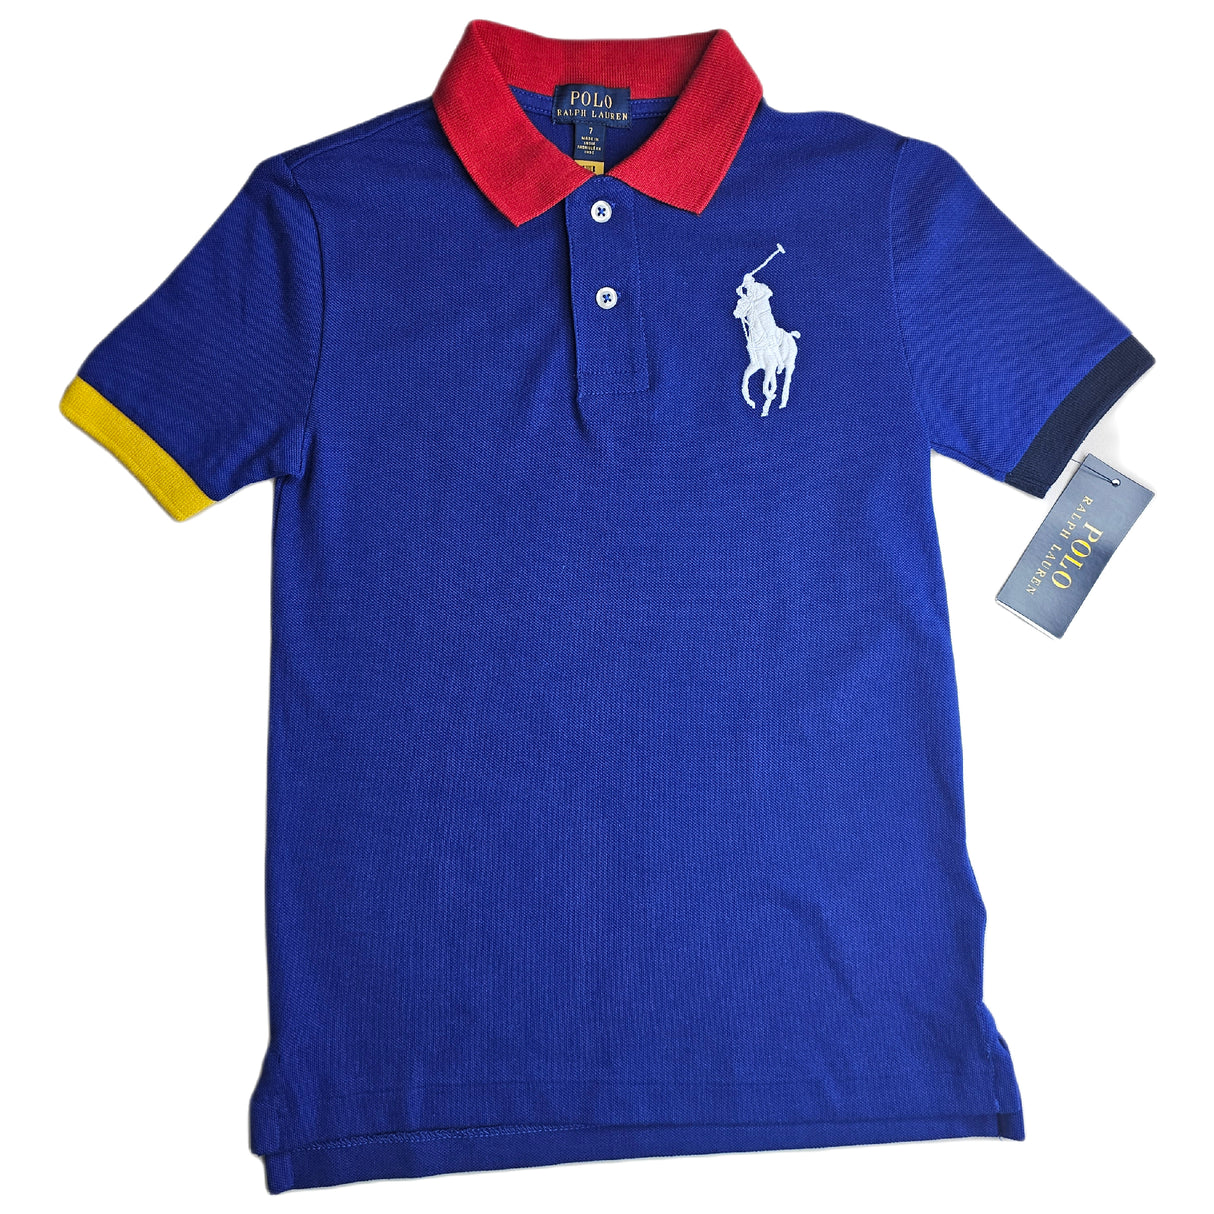 A Second Chance - Polo Ralph Lauren Blue  Shirt 7 Kids - Delivery All Over Lebanon